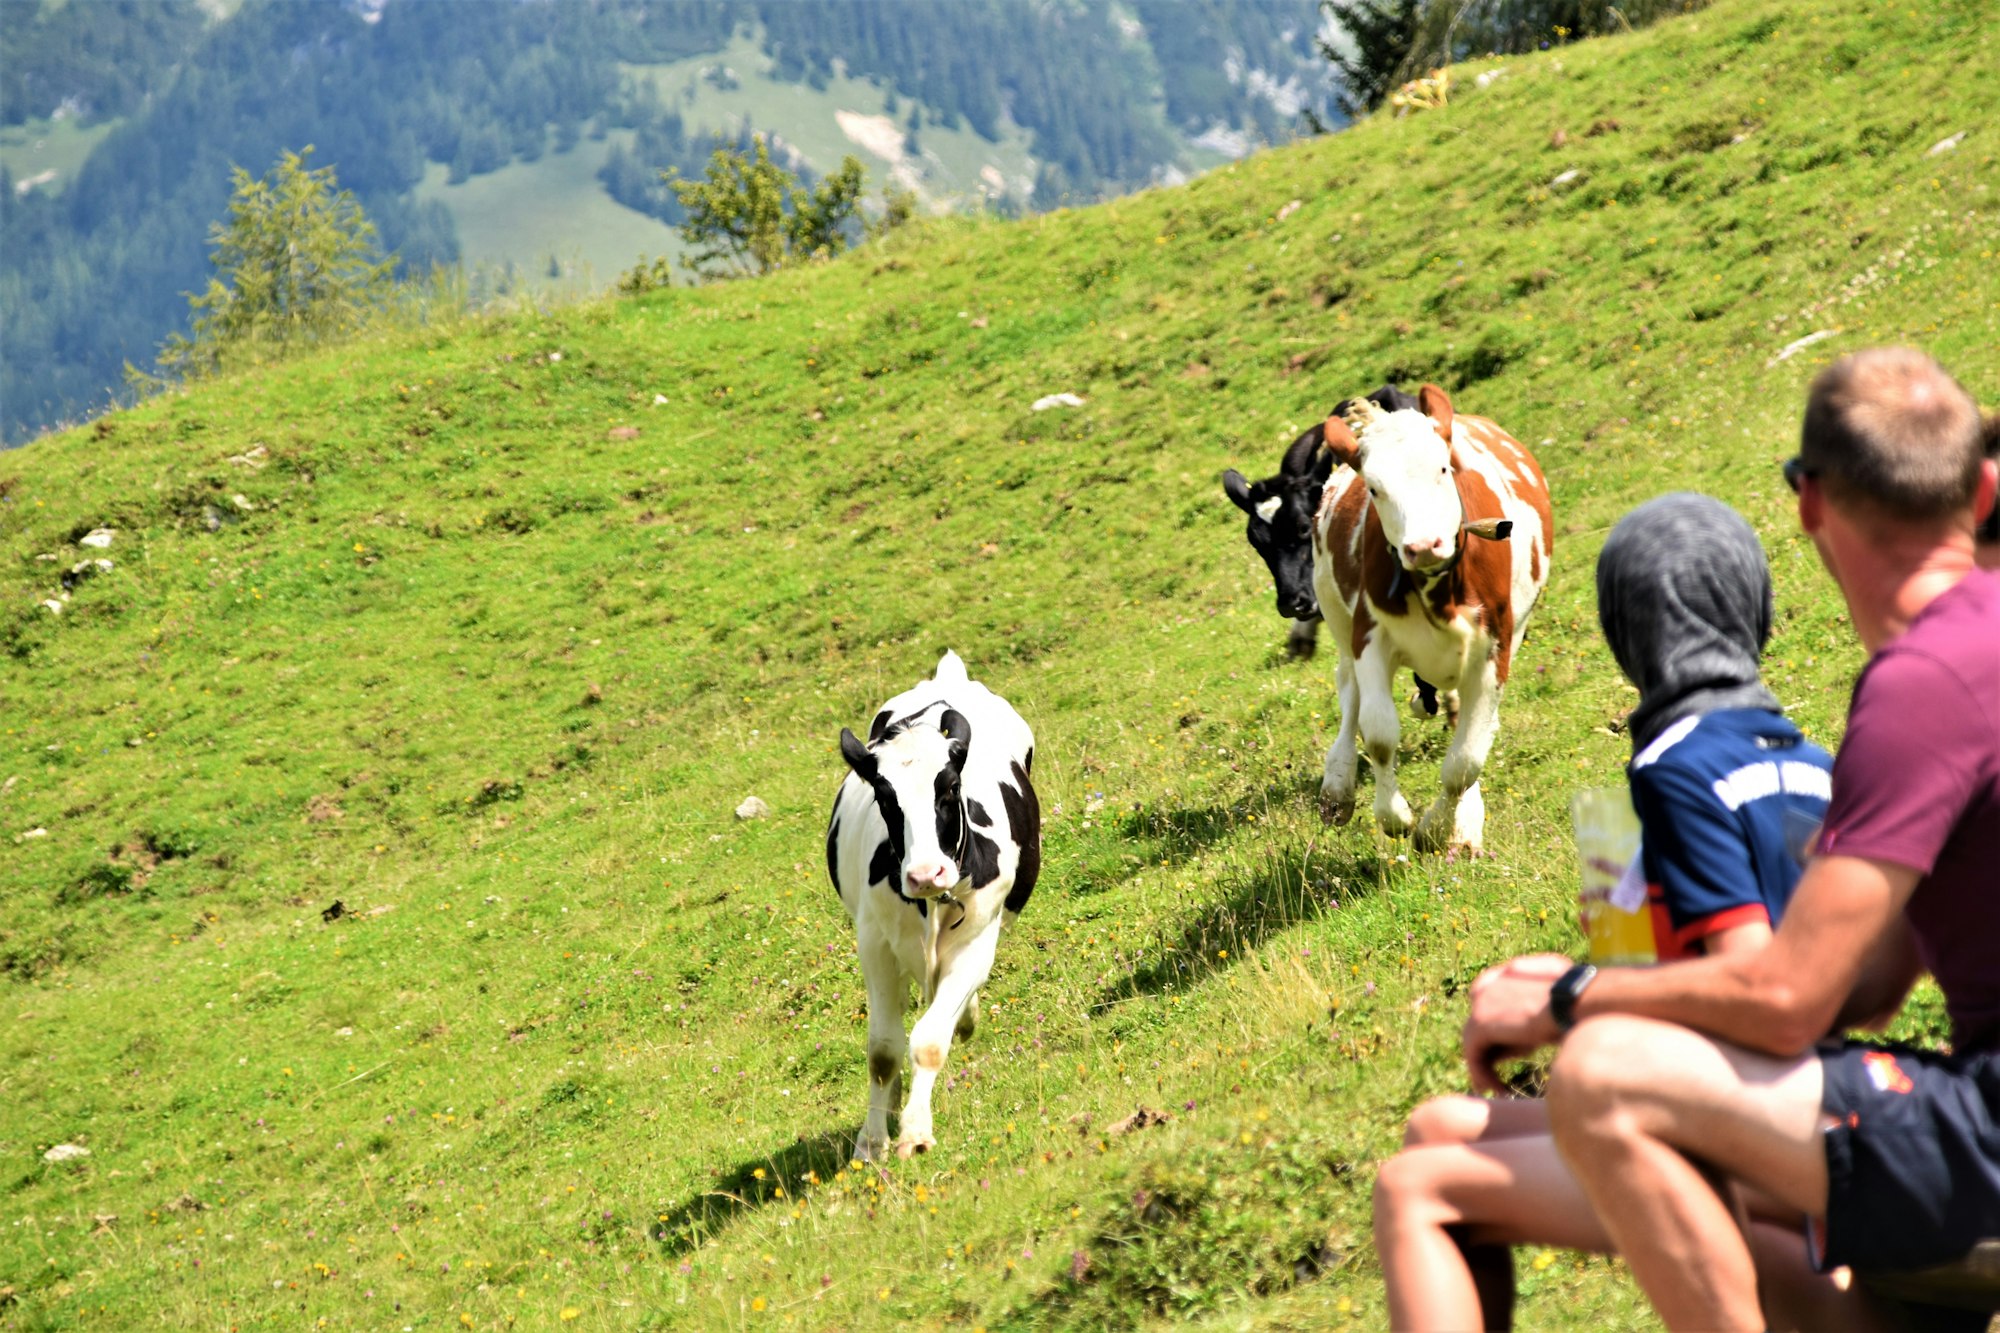 Thirsty cows are running in front of the hikers